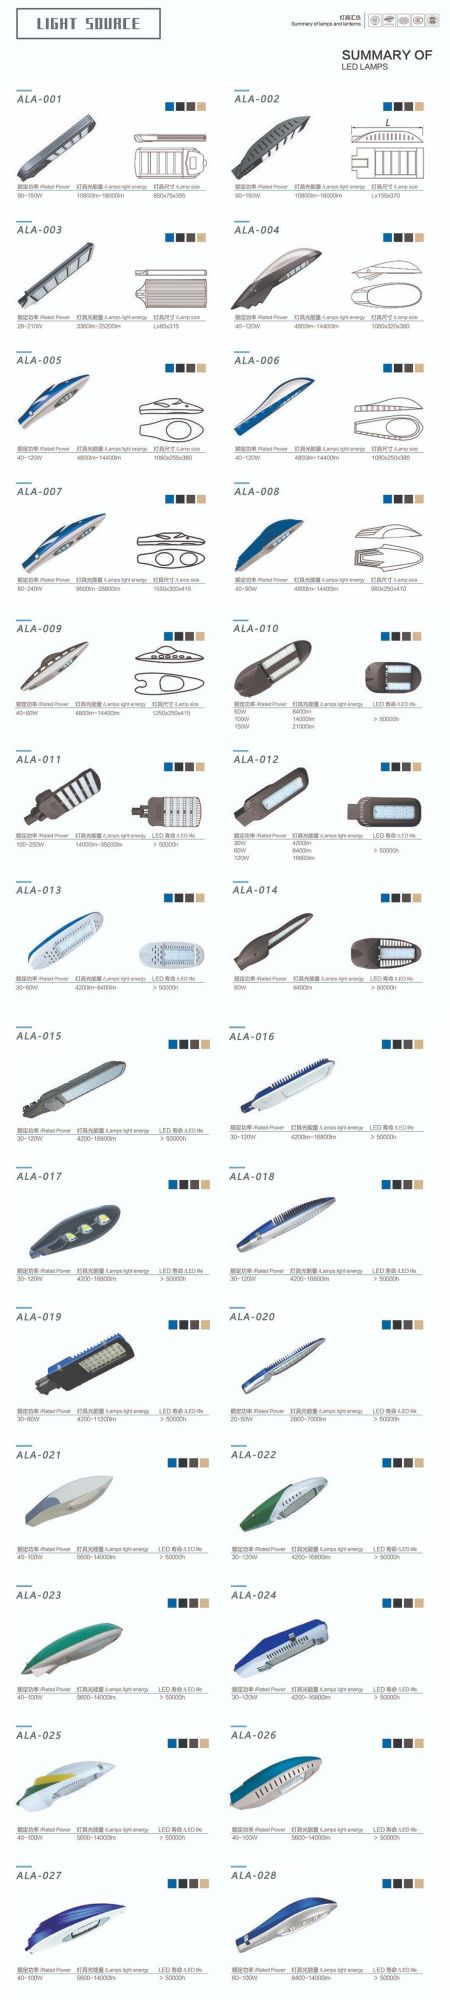 Ala Professional Outdoor Painting LED Street Light 30W All in One Street Light Street Light Lift